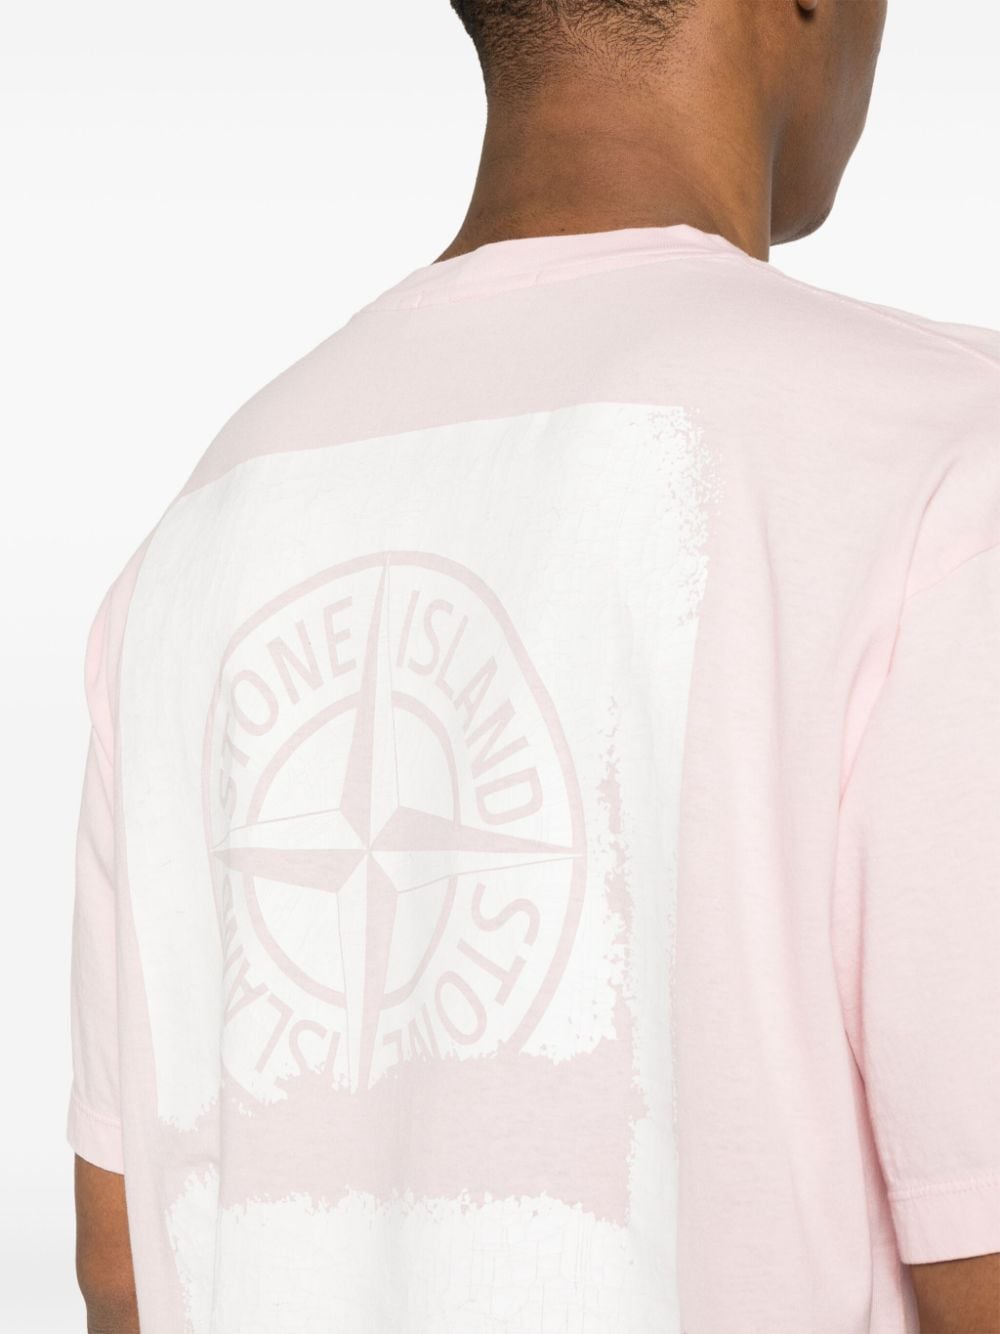 Stone Island - T Shirt rose 2RC89 'SCRATCHED PAINT ONE' PRINT - Lothaire